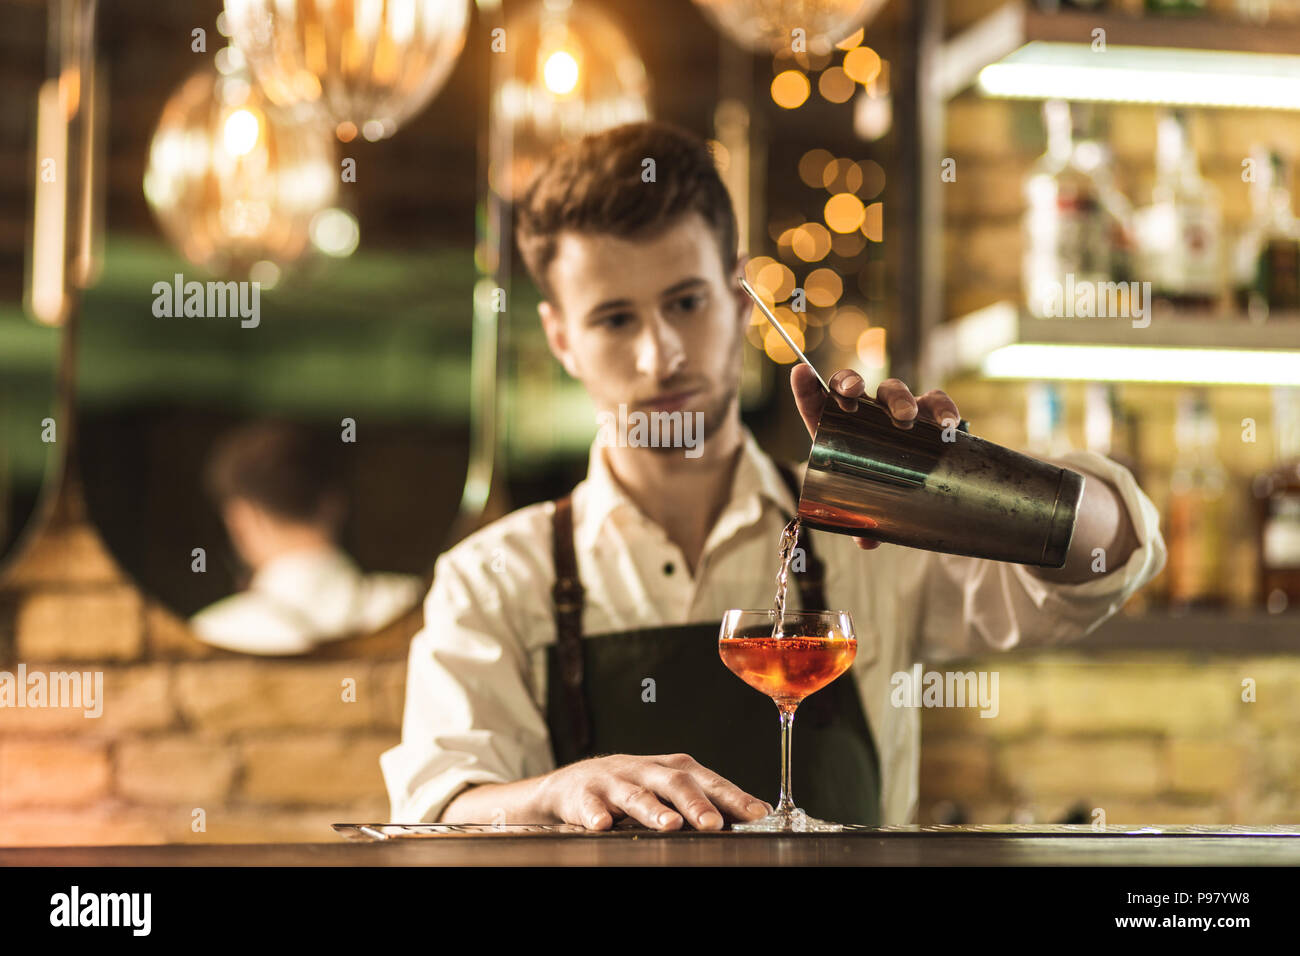 Pleasant young barman mixing a cocktail Stock Photo